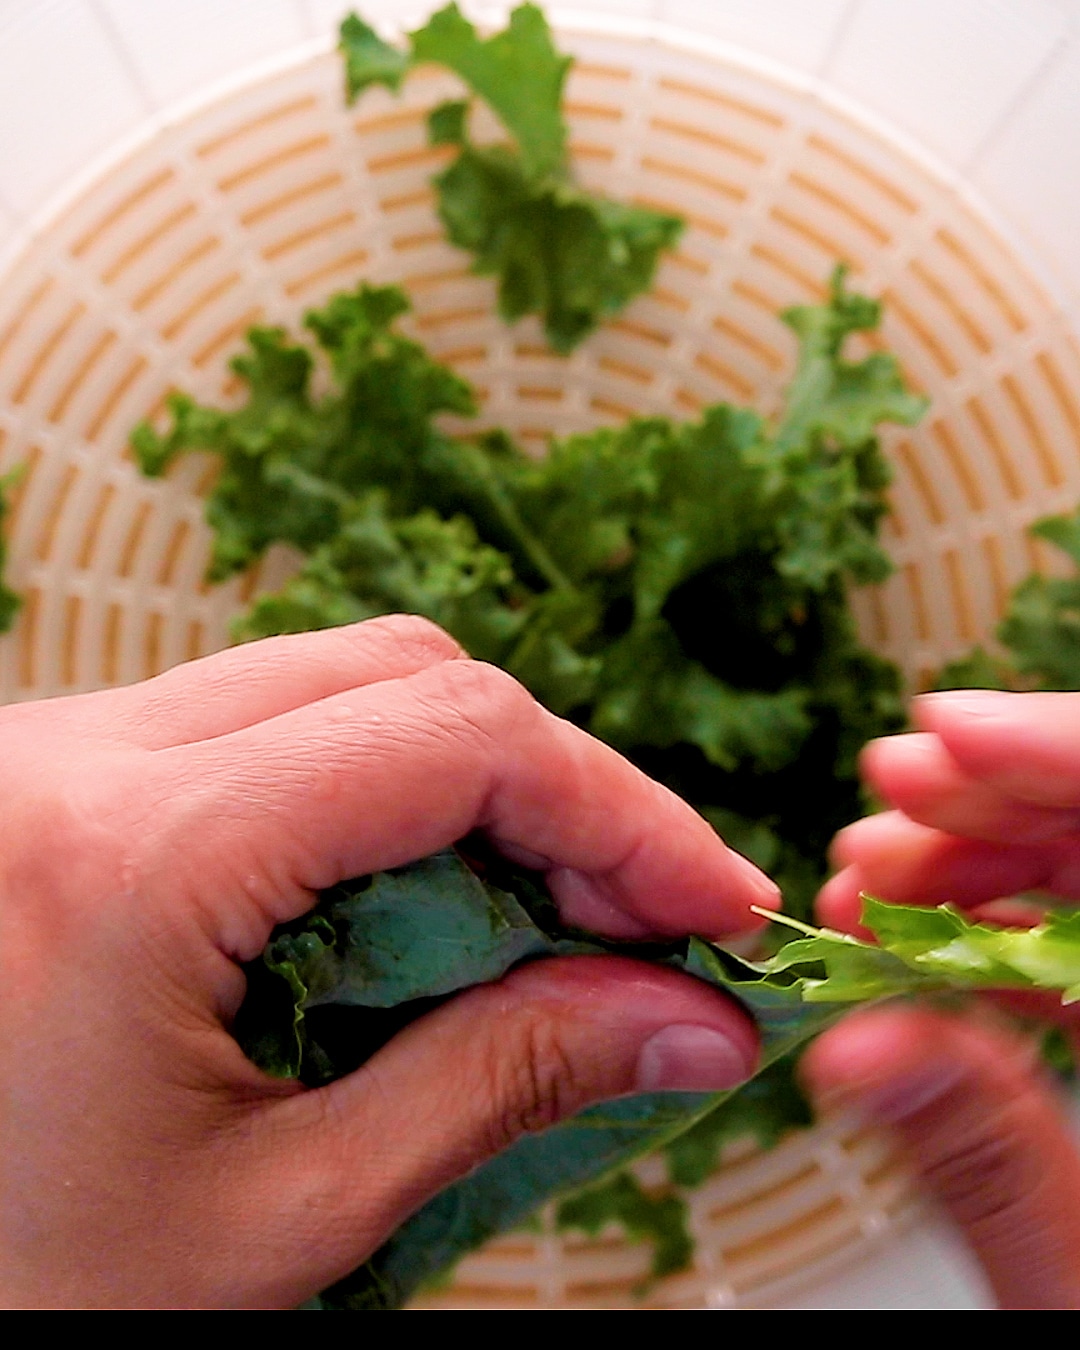 Separating the kale leaves from the ribs into bite-sized pieces into a salad spinner.